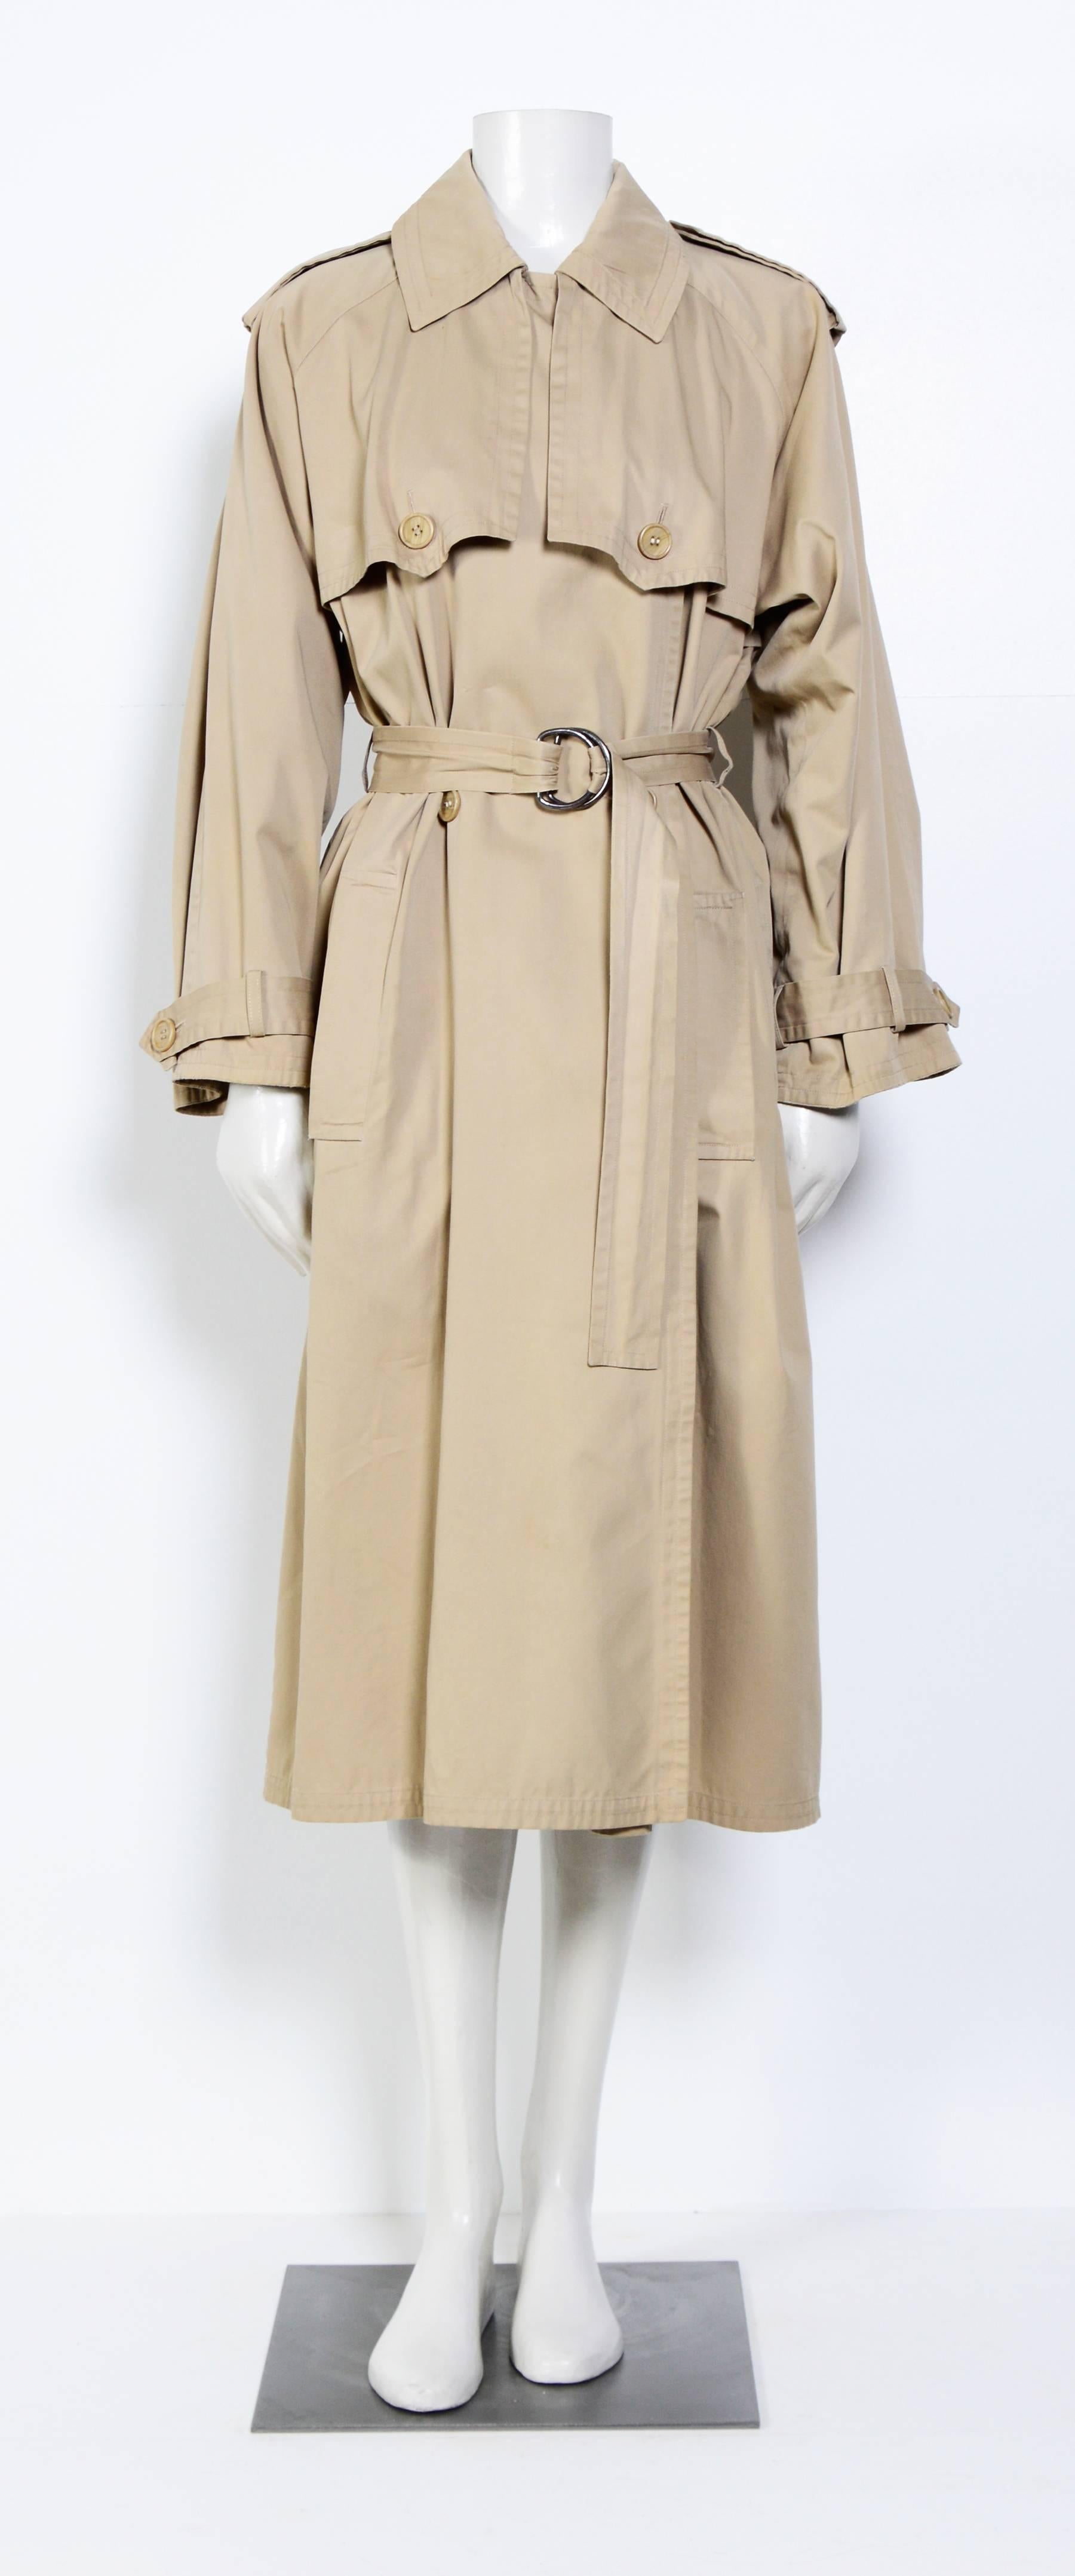 Classic Saint Laurent trenchcoat circa 1960's.
Please go by measurements taken flat in inches: Ua to Ua 22,5